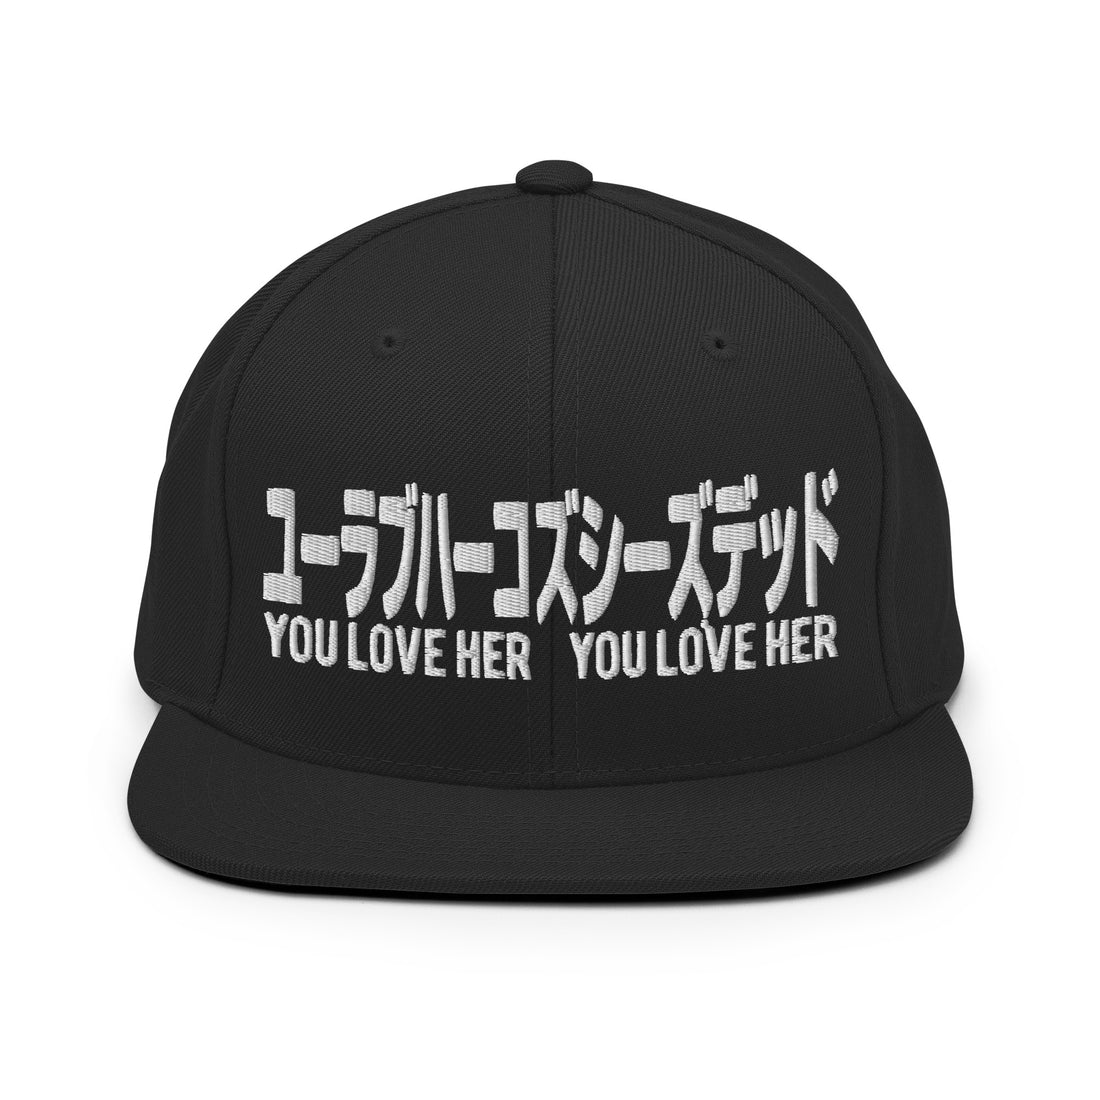 YOU LOVE HER - Snapback Hat - YOU LOVE HER